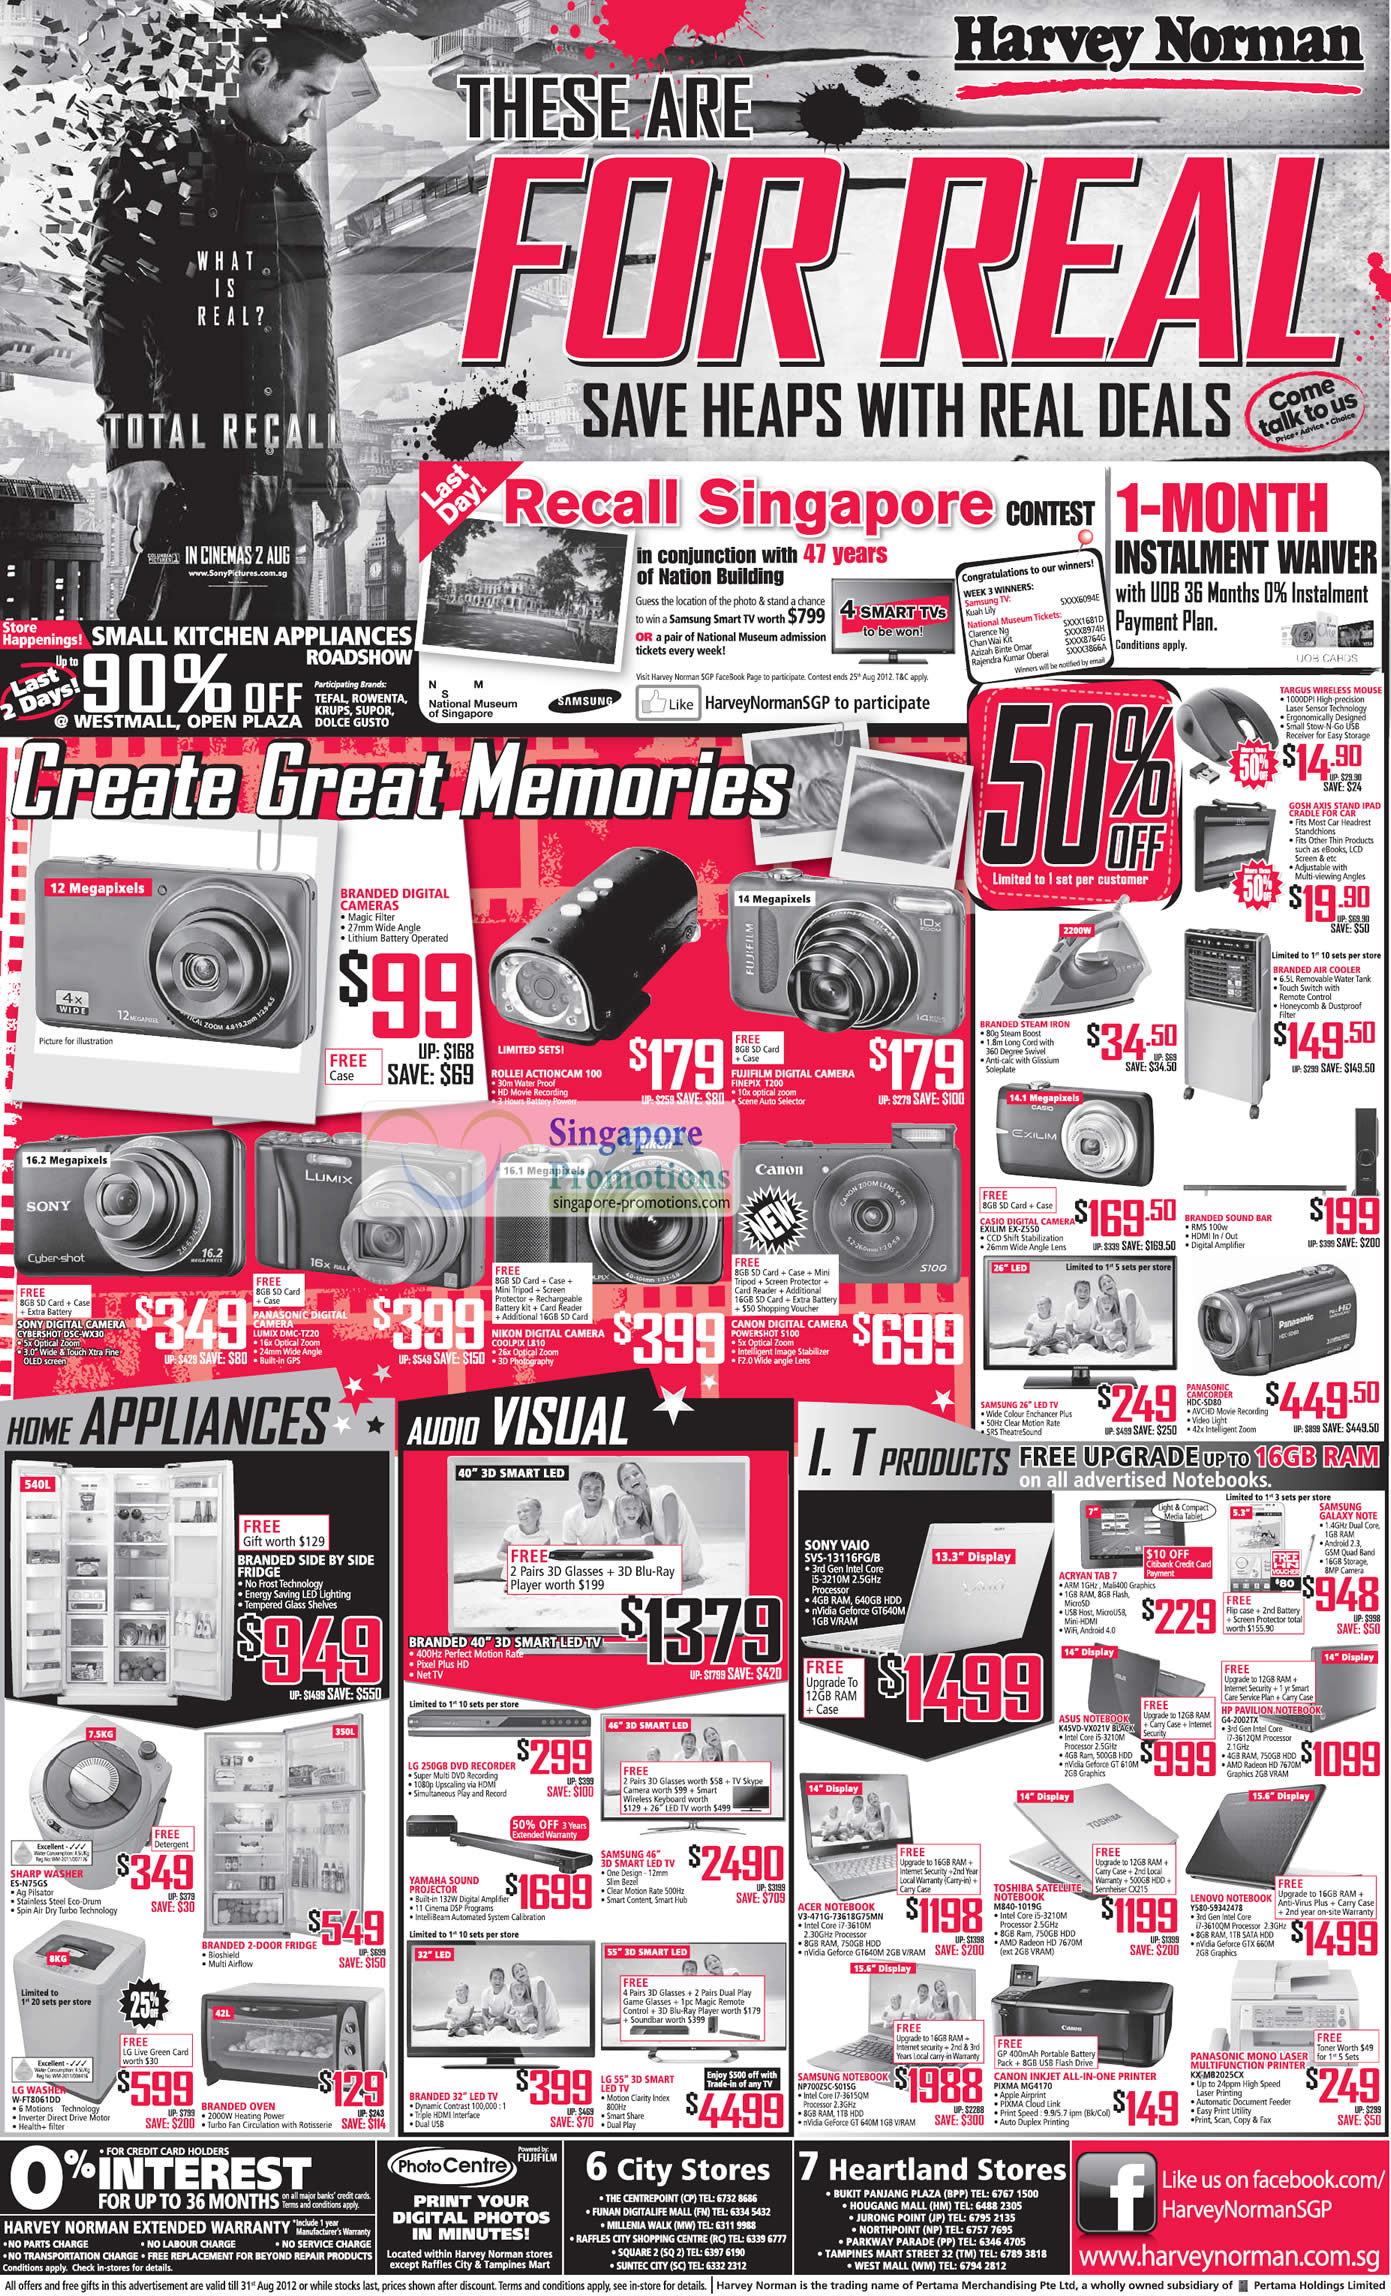 Featured image for Harvey Norman Digital Cameras, Furniture, Notebooks & Appliances Offers 25 - 31 Aug 2012